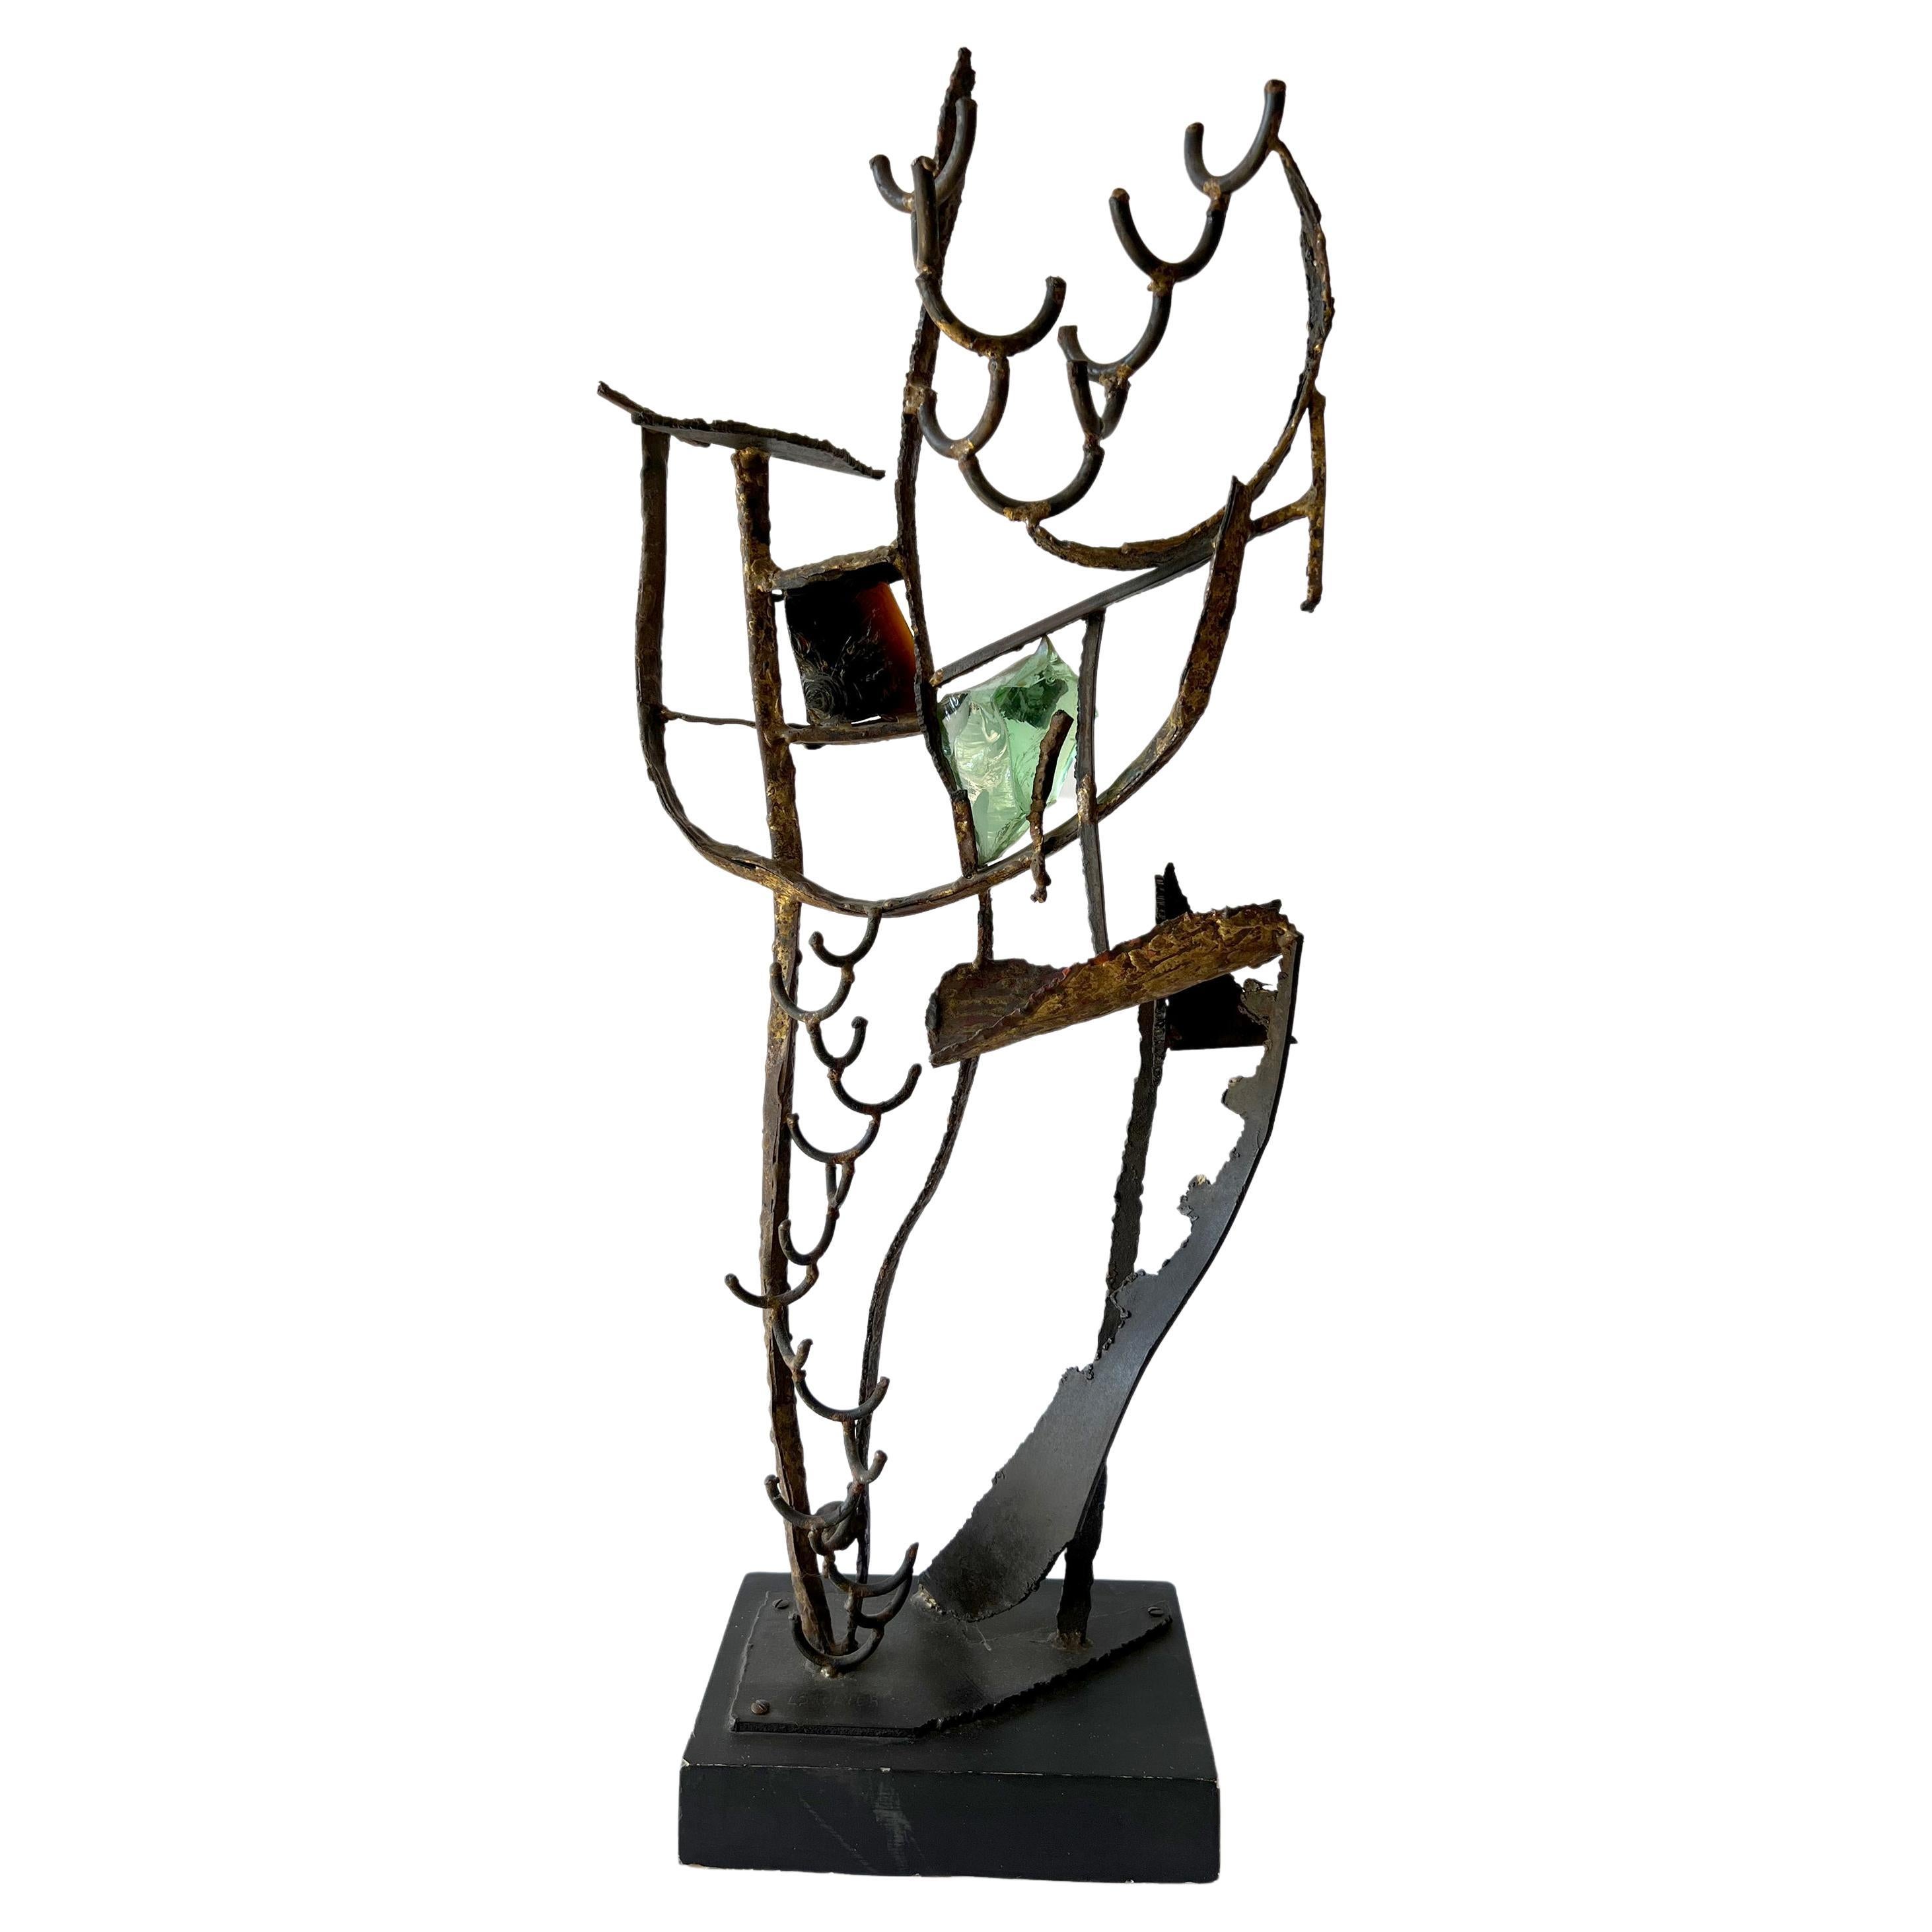 1950s Leon Saulter California Abstract Modern Iron Glass Sculpture For Sale